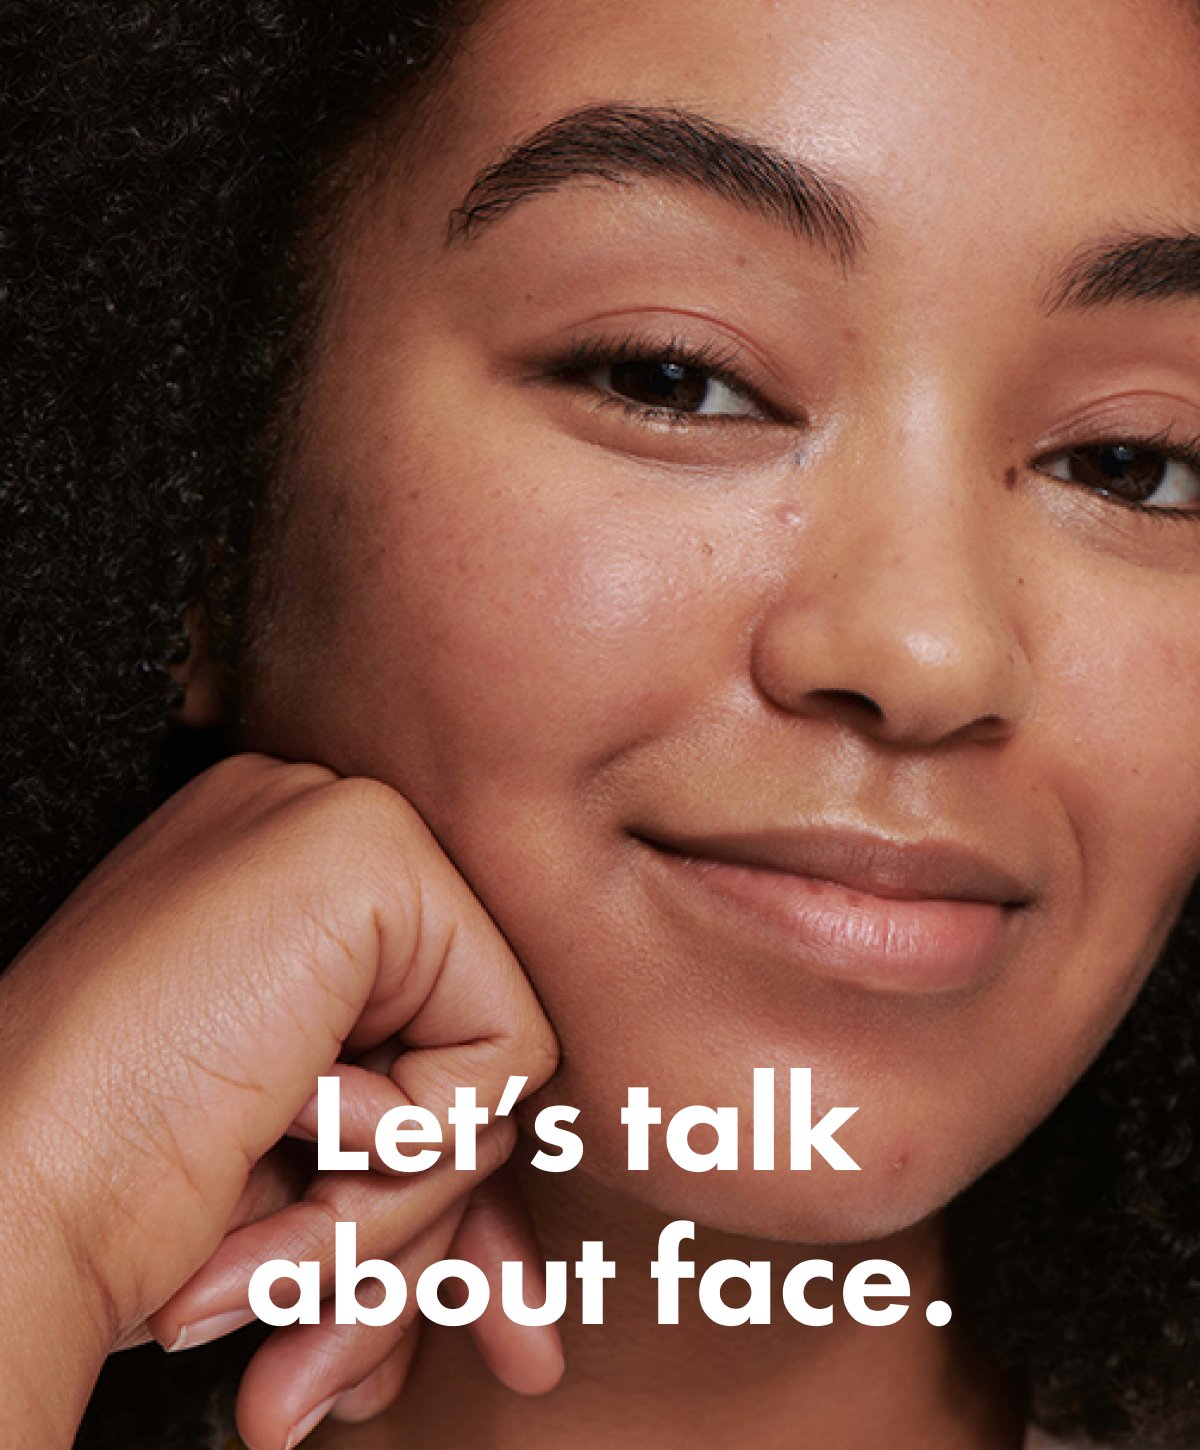 Woman smirking.  Text "Let's talk about face."